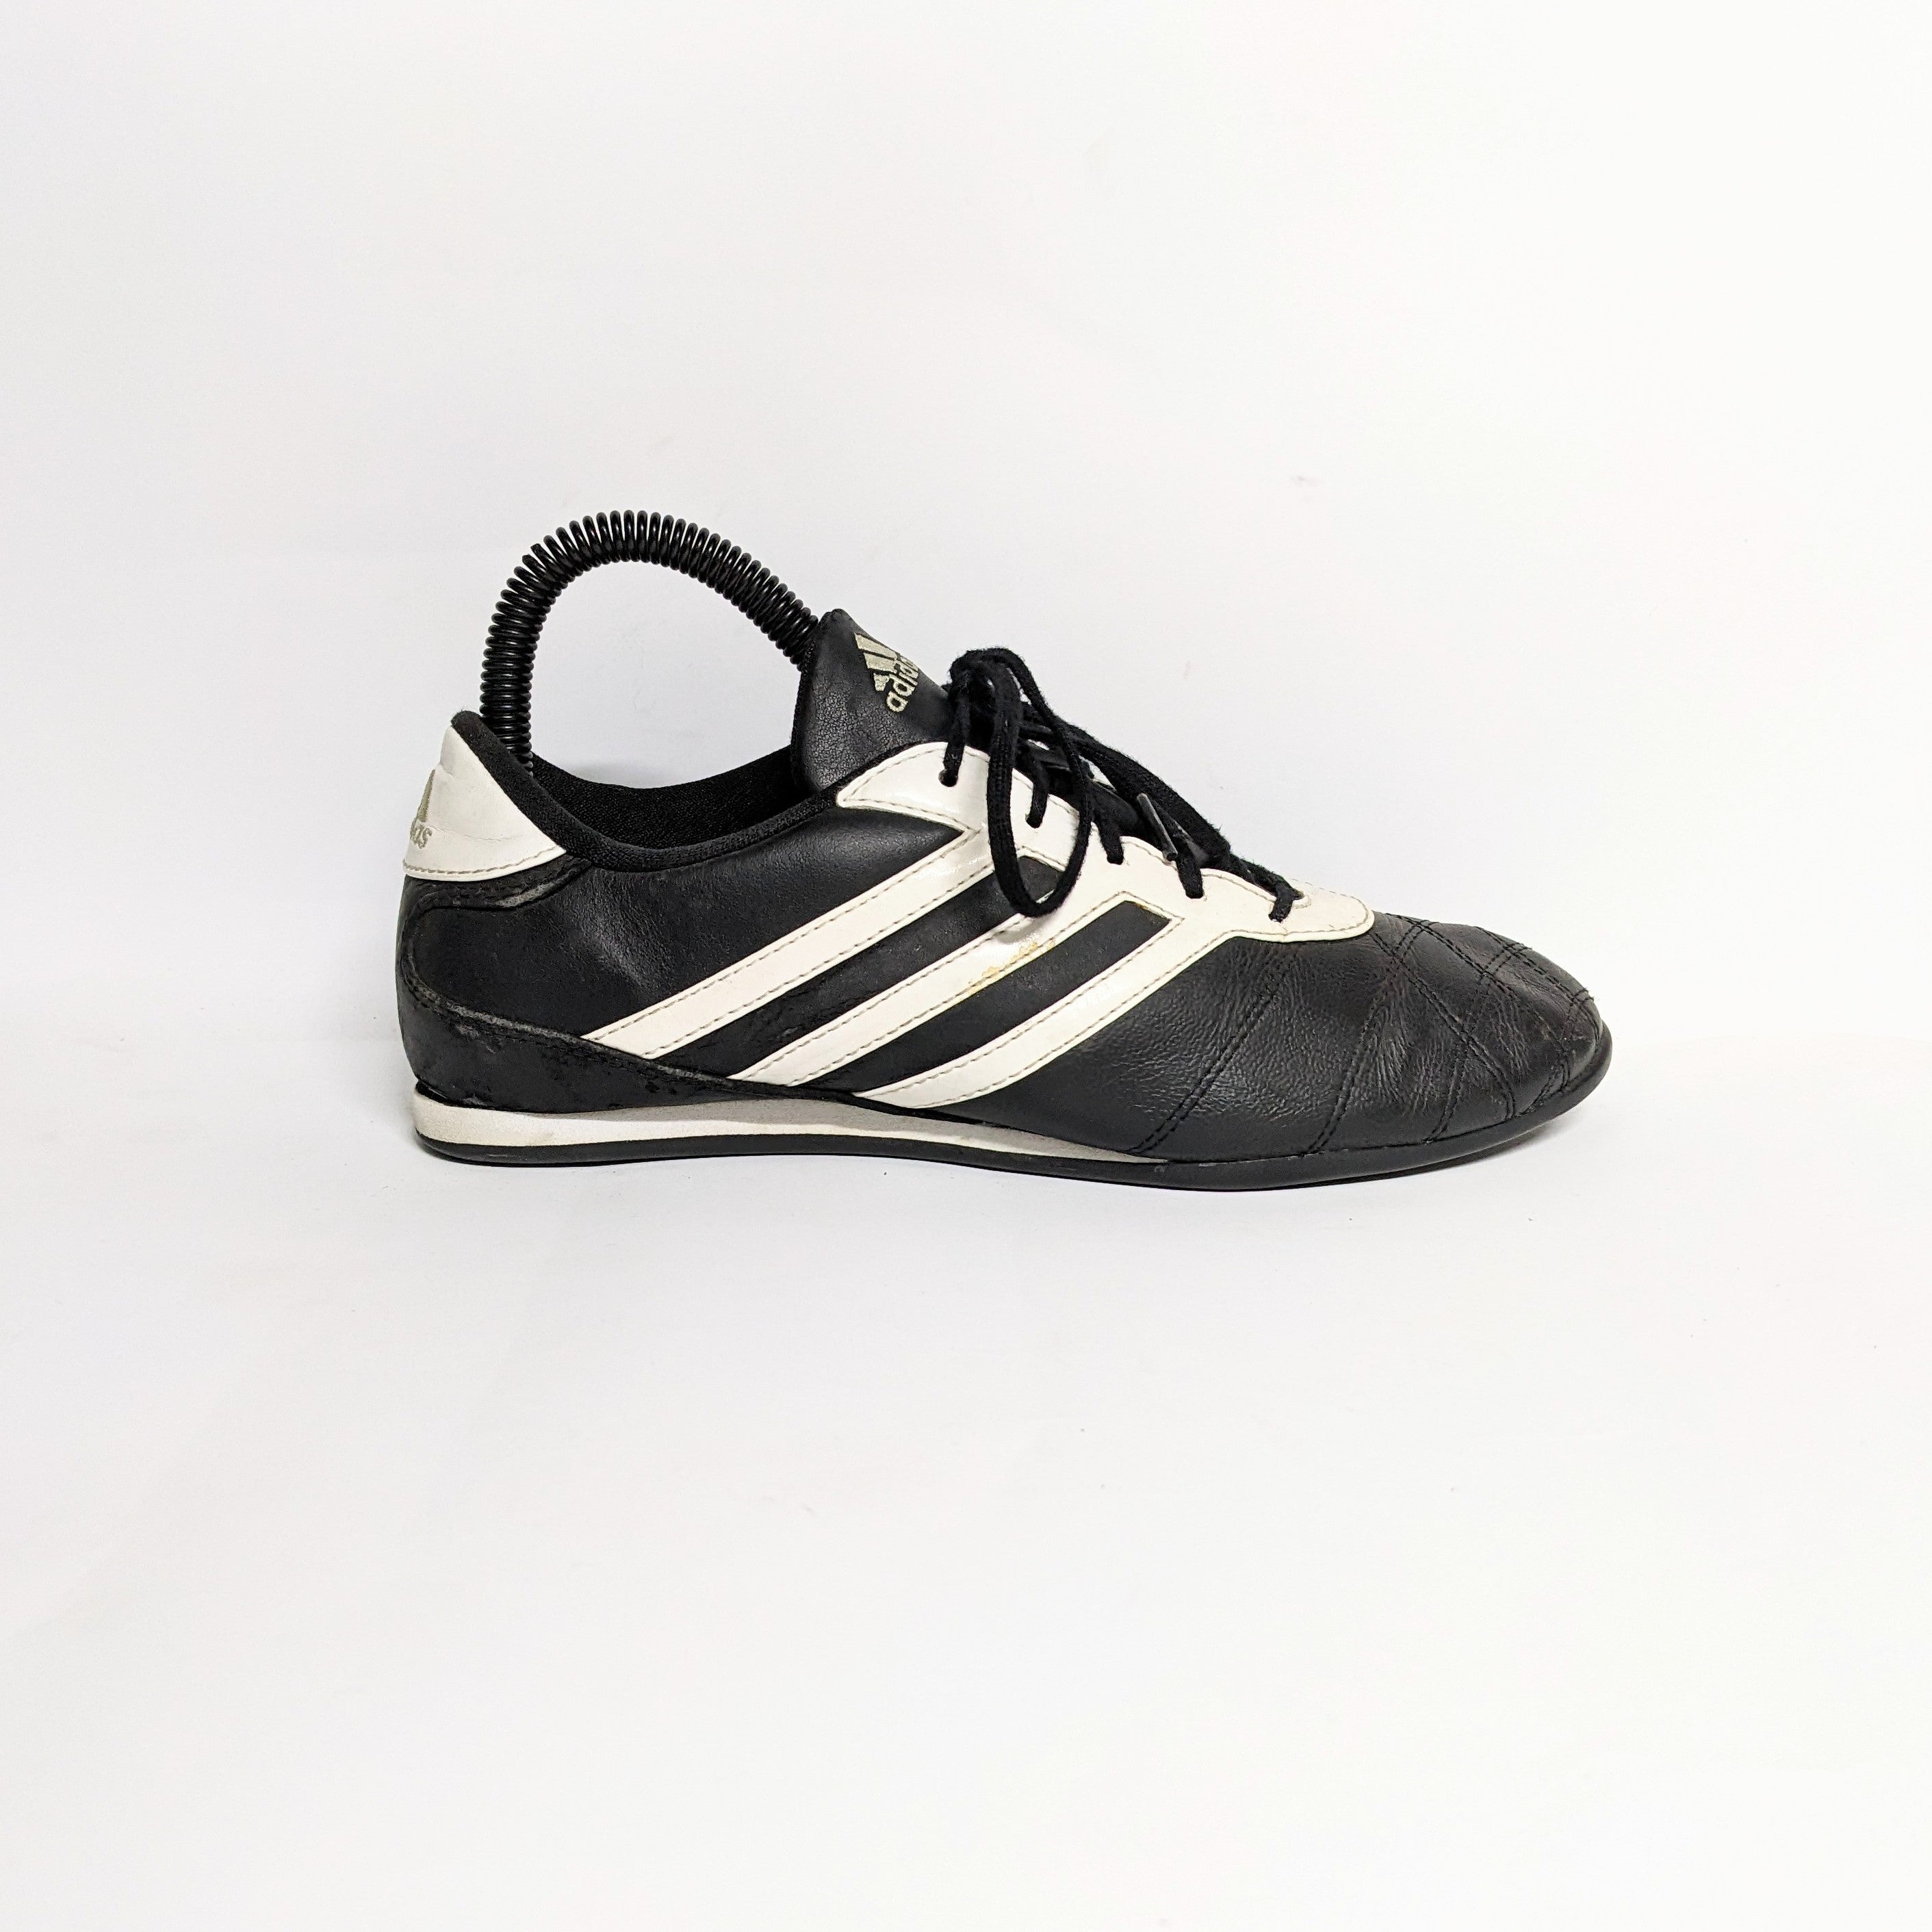 Second Hand Black adidas Leather Sneakers